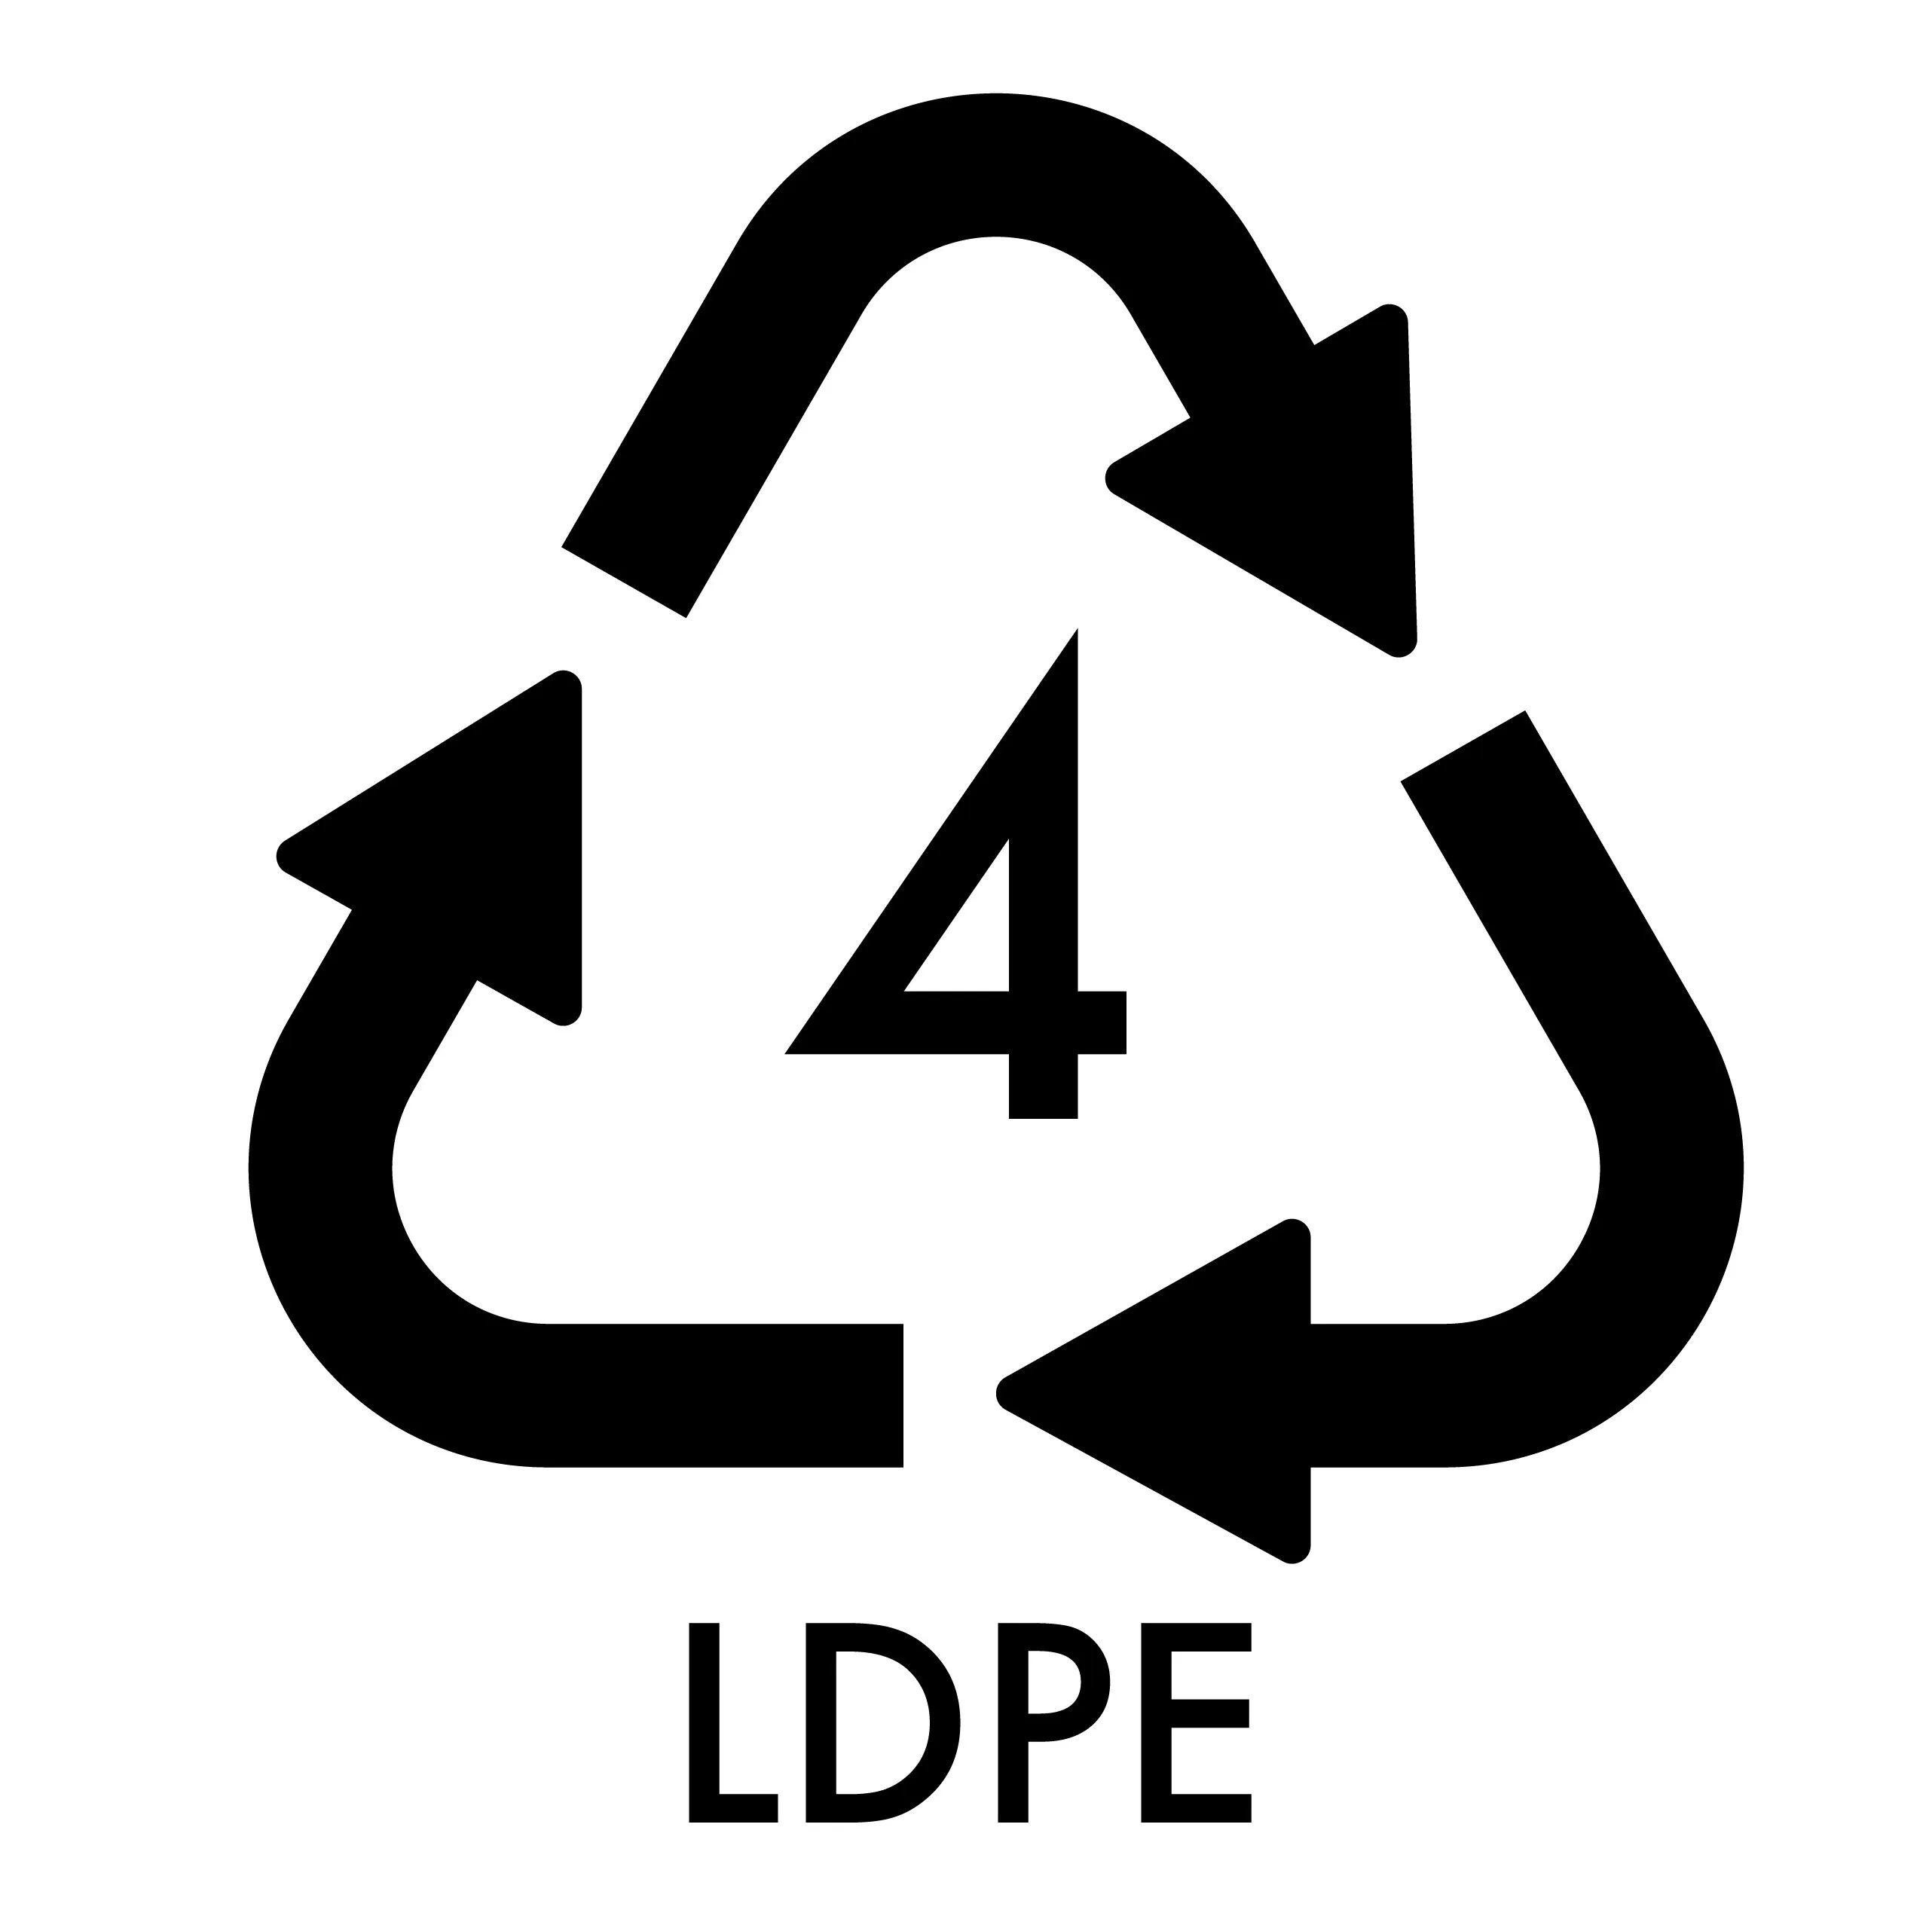 Recycling symbol - number 4: LDPE